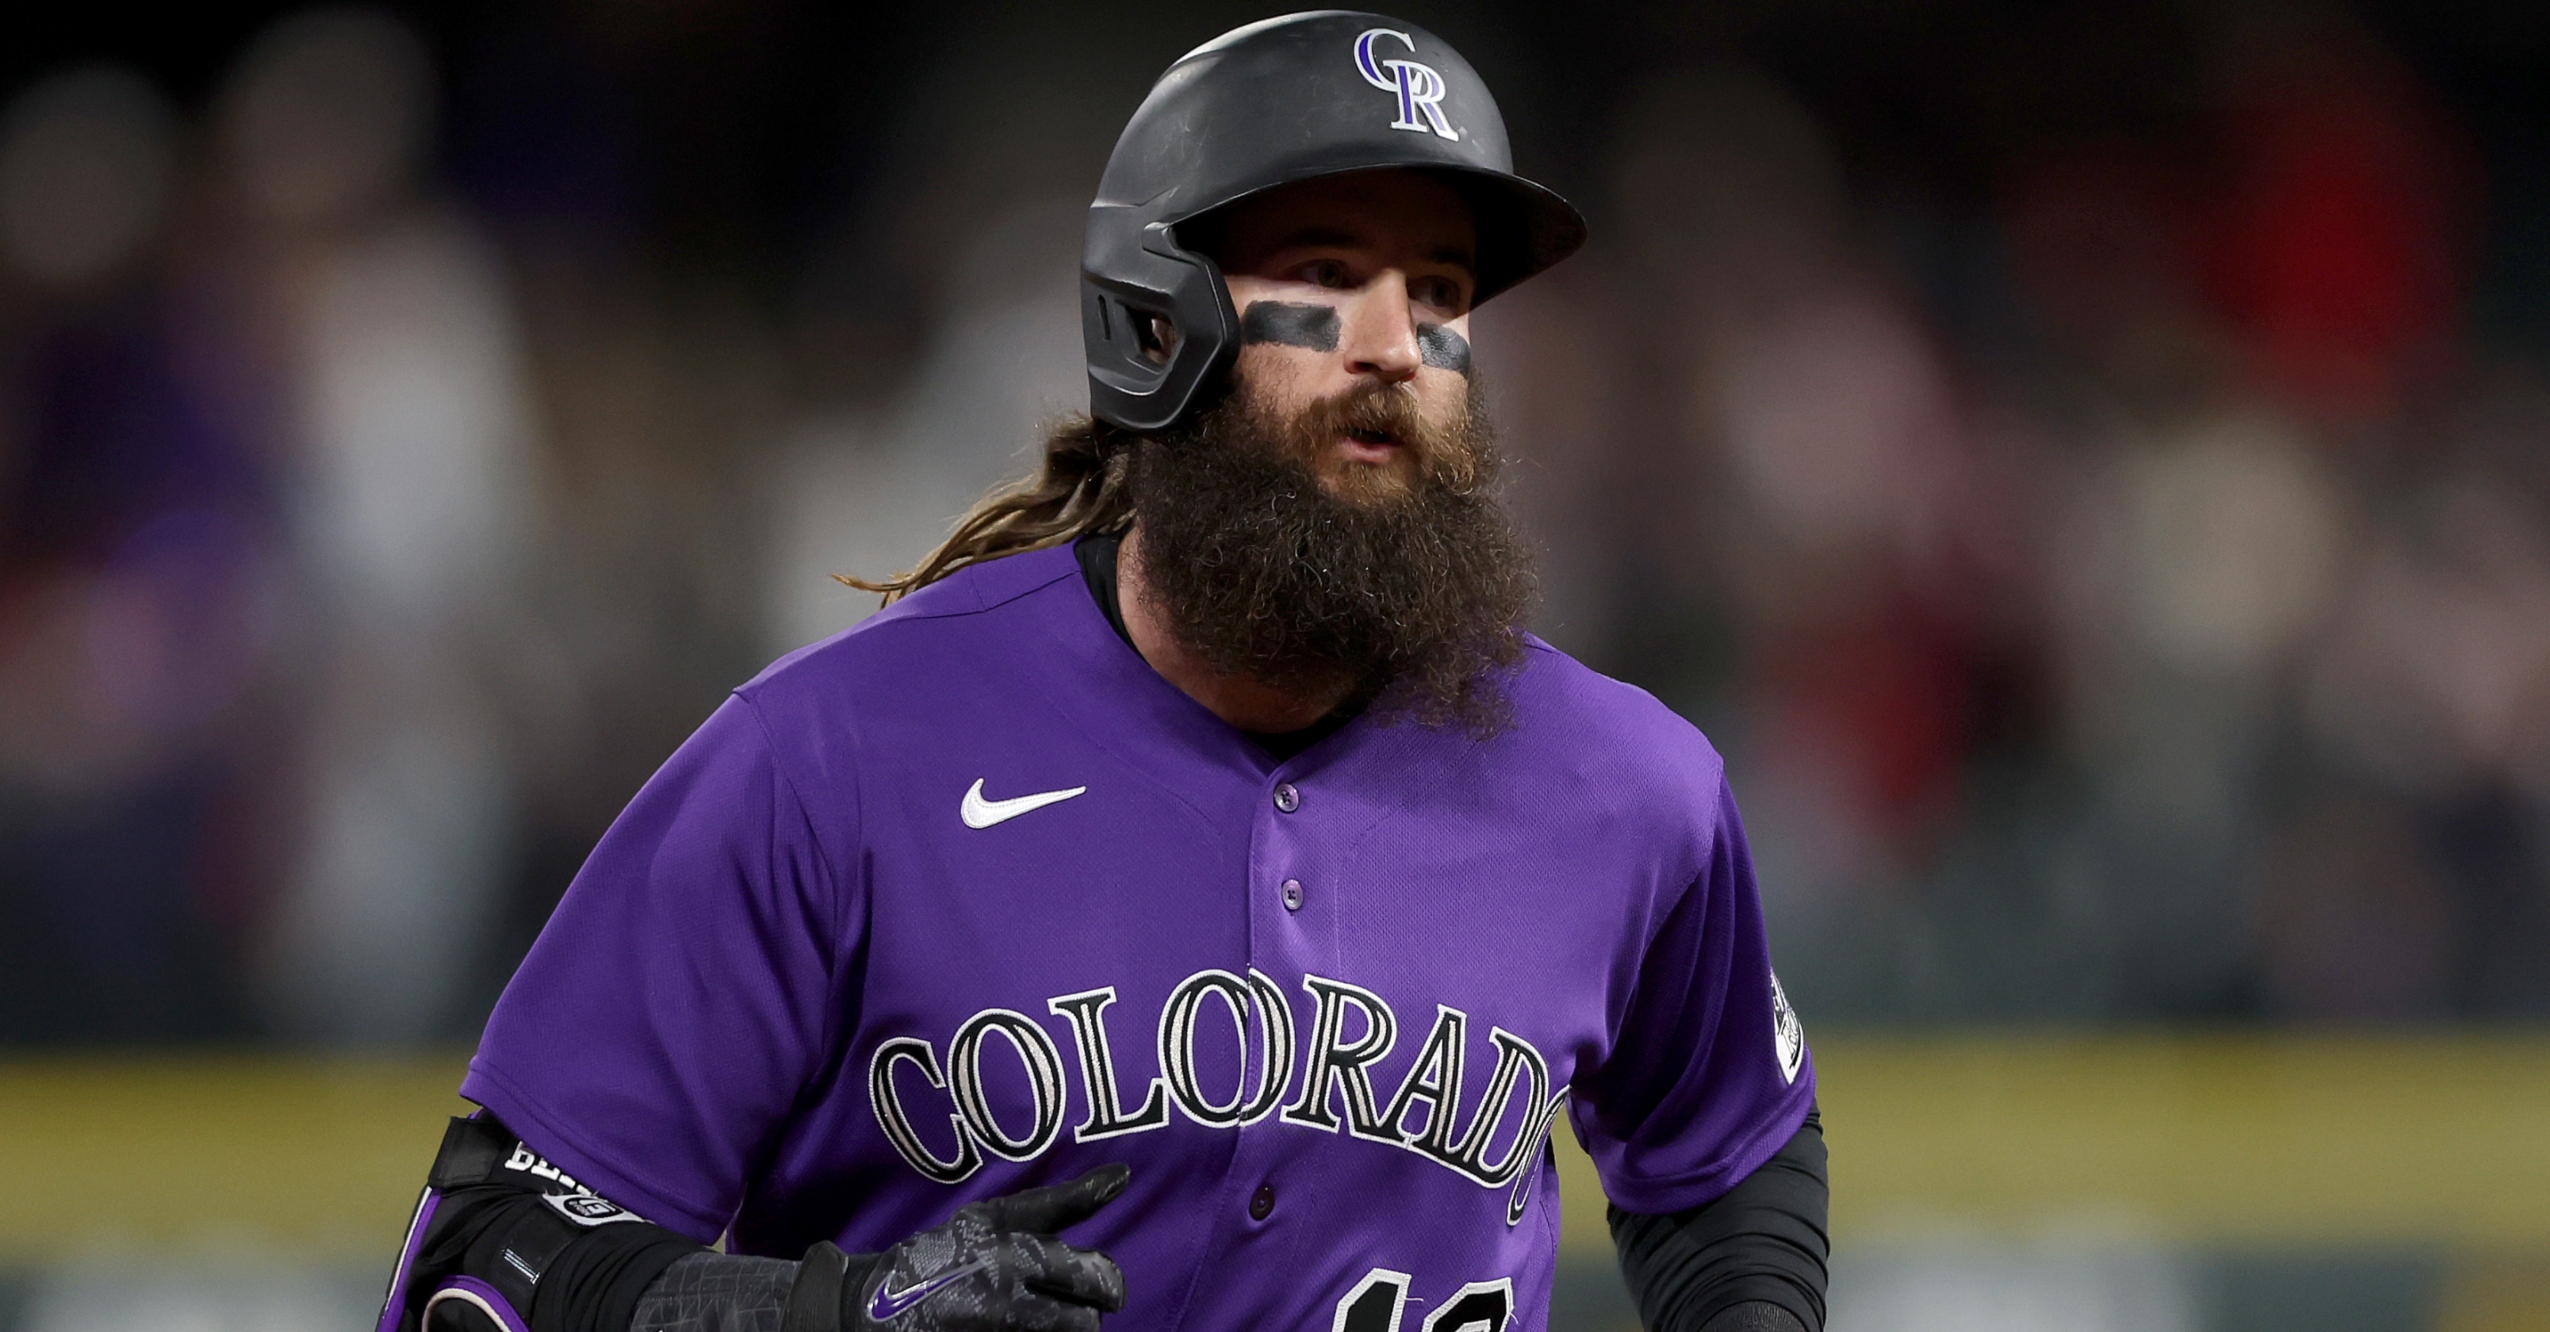 Charlie Blackmon's near cycle lets us in on why he just keeps